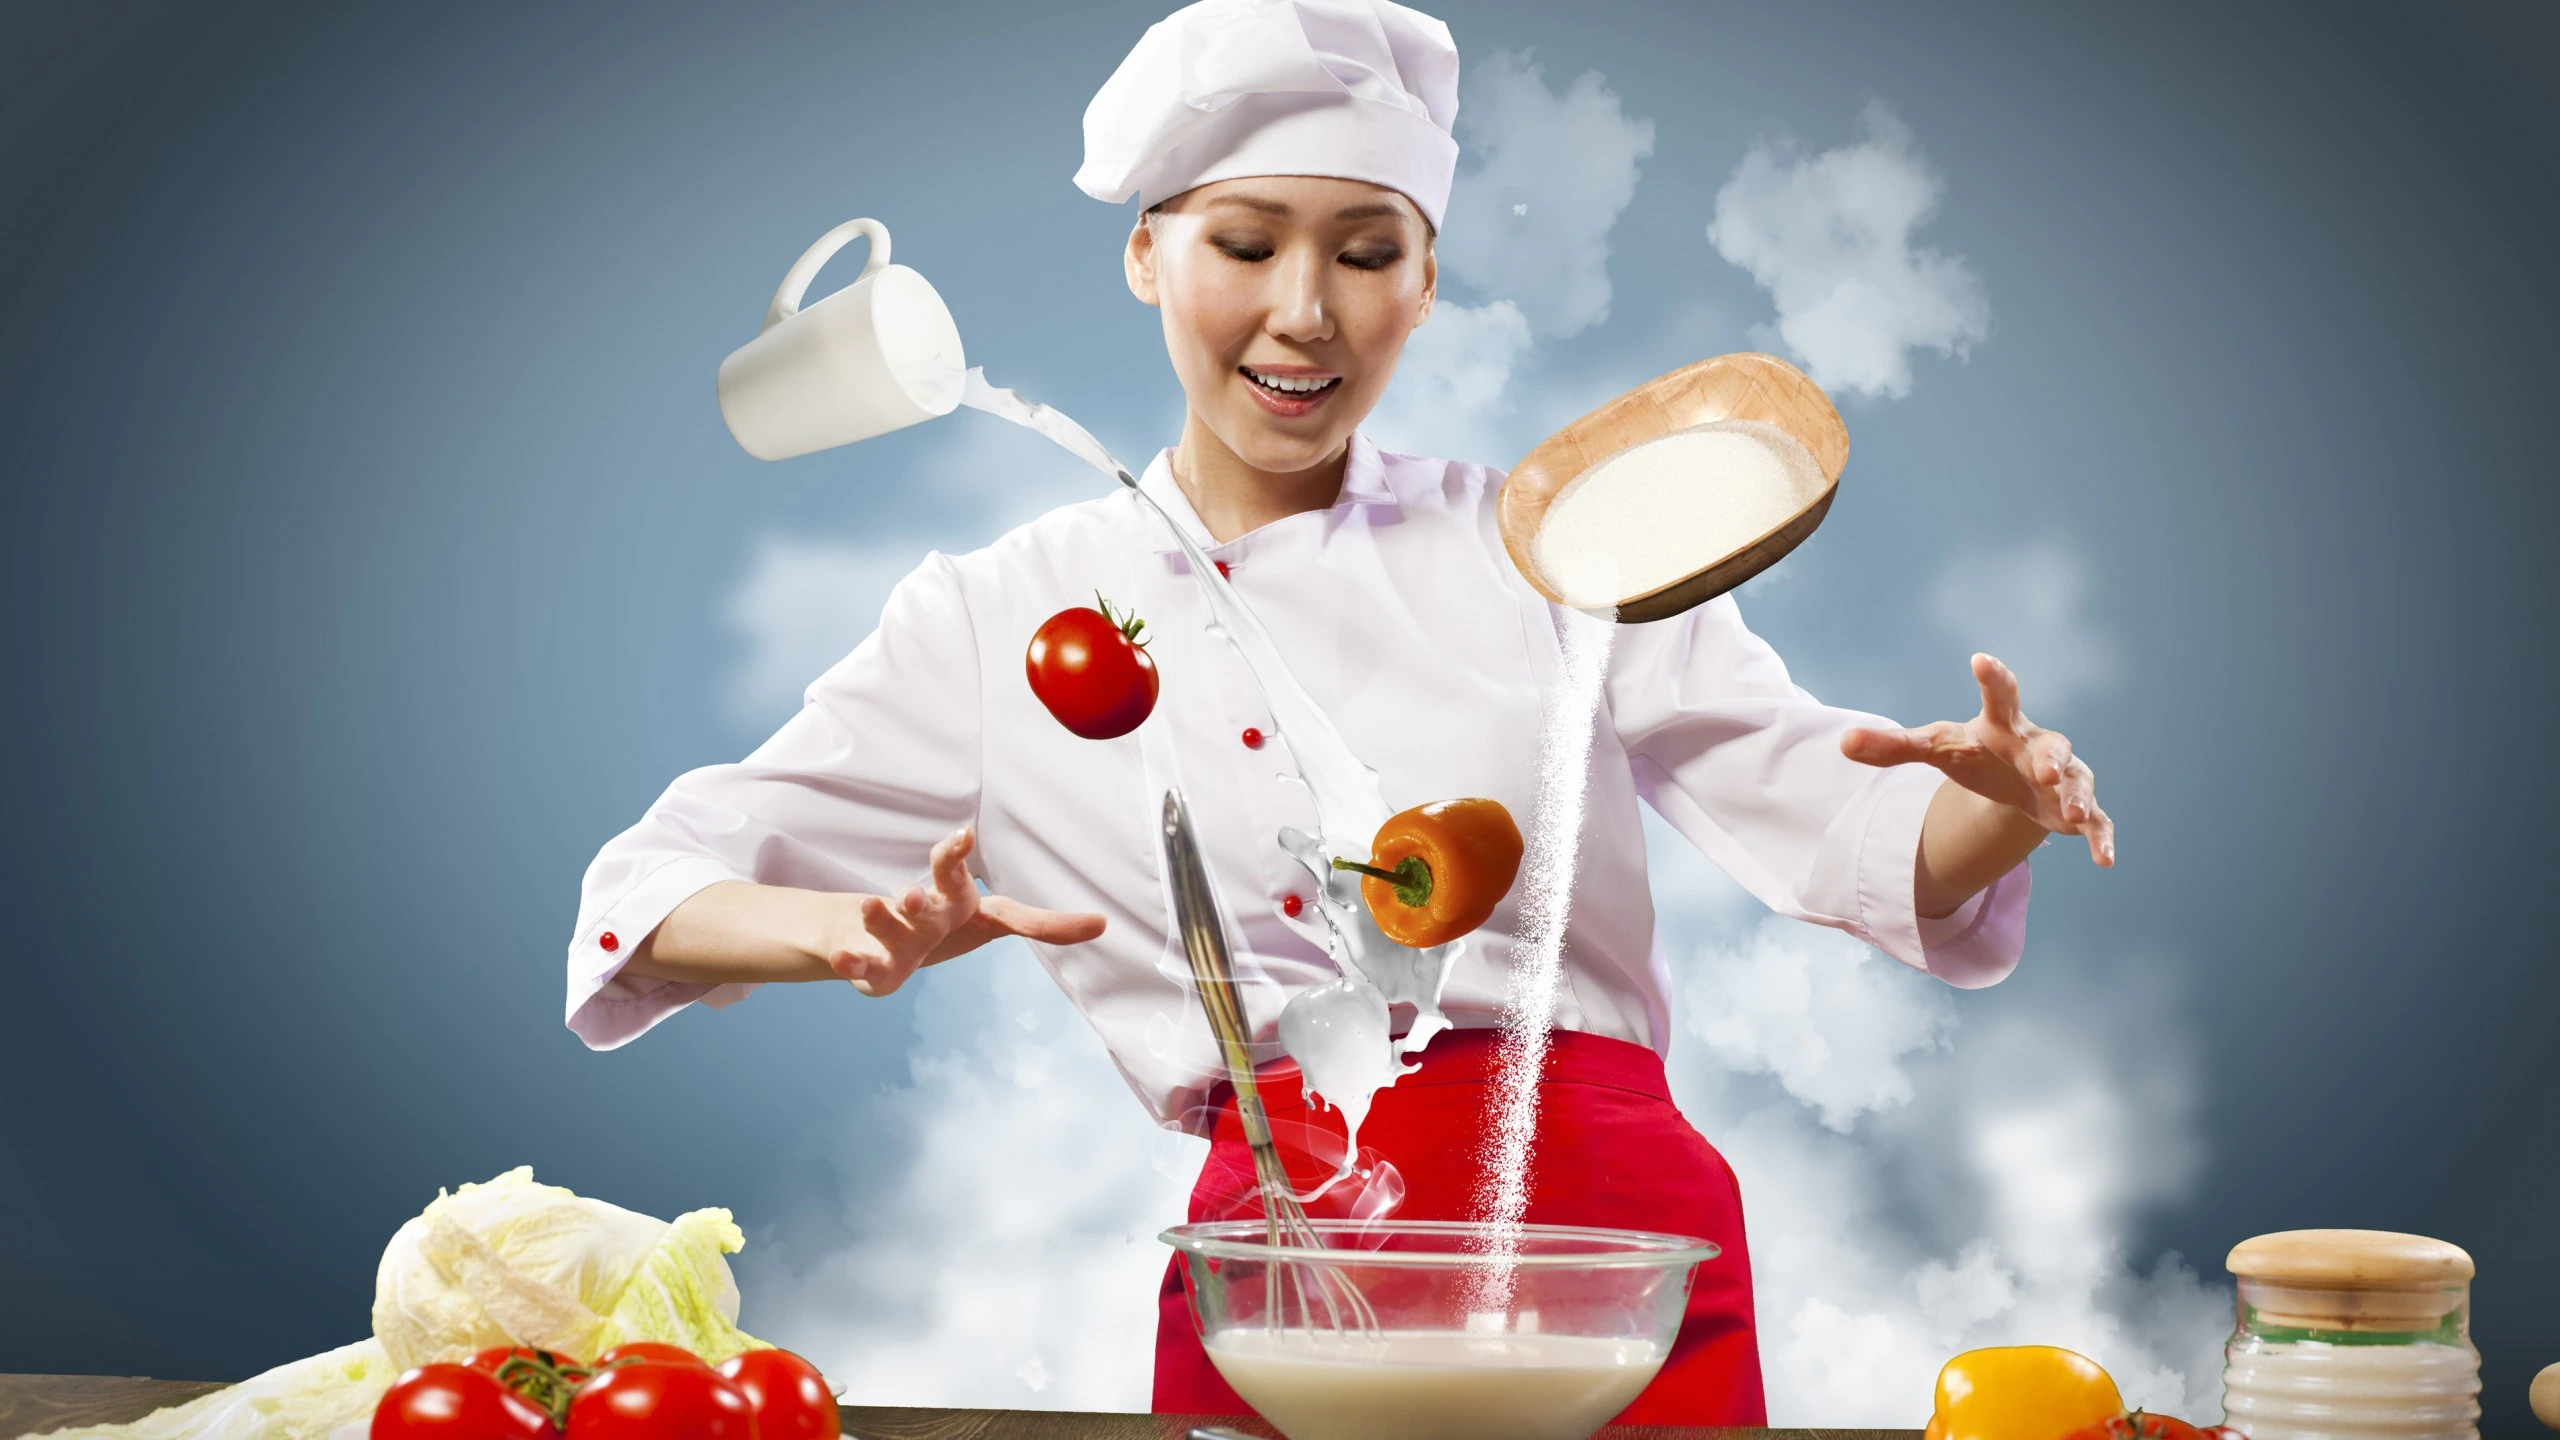 5 Interesting Food Facts for Every Hotel Management Student to Know